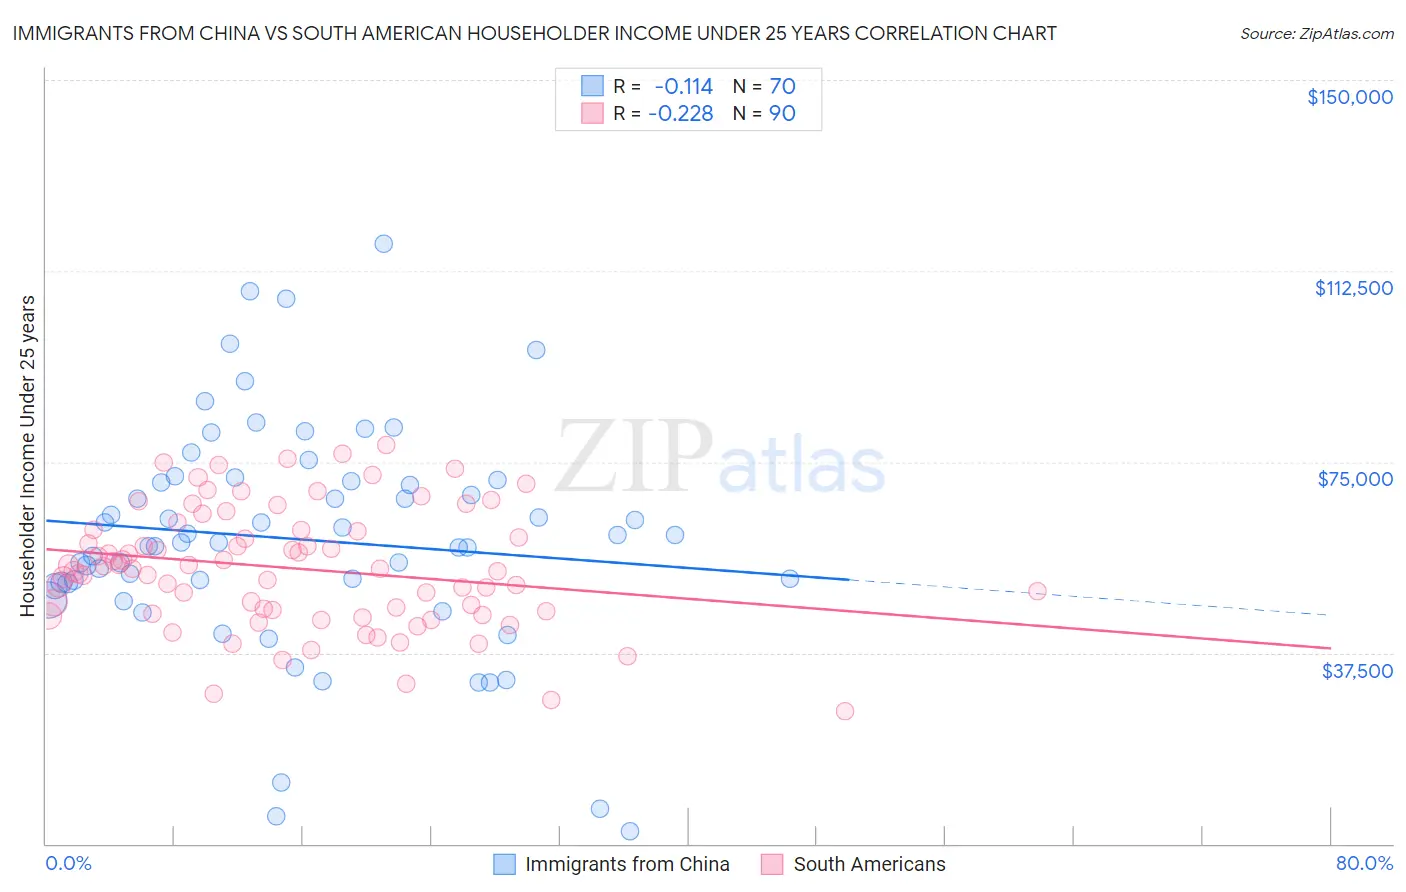 Immigrants from China vs South American Householder Income Under 25 years